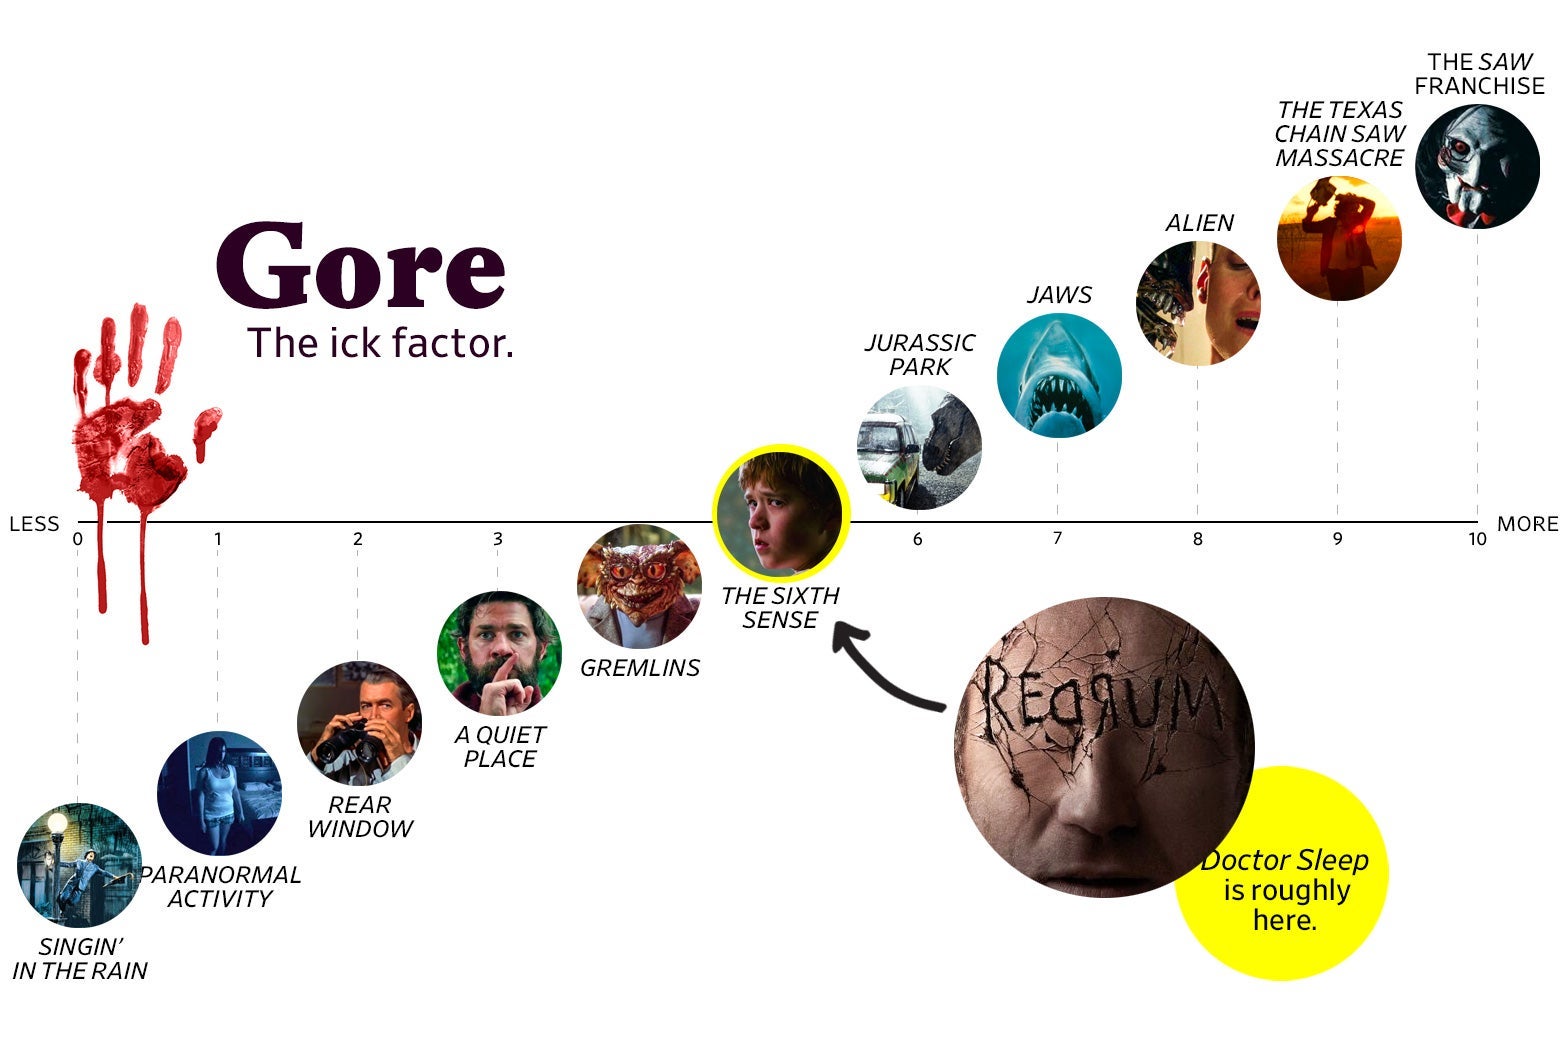 A chart titled “Gore: the Ick Factor” shows that Doctor Sleep ranks a 5 in goriness, roughly the same as the The Sixth Sense. The scale ranges from Singin’ in the Rain (0) to the Saw franchise (10).